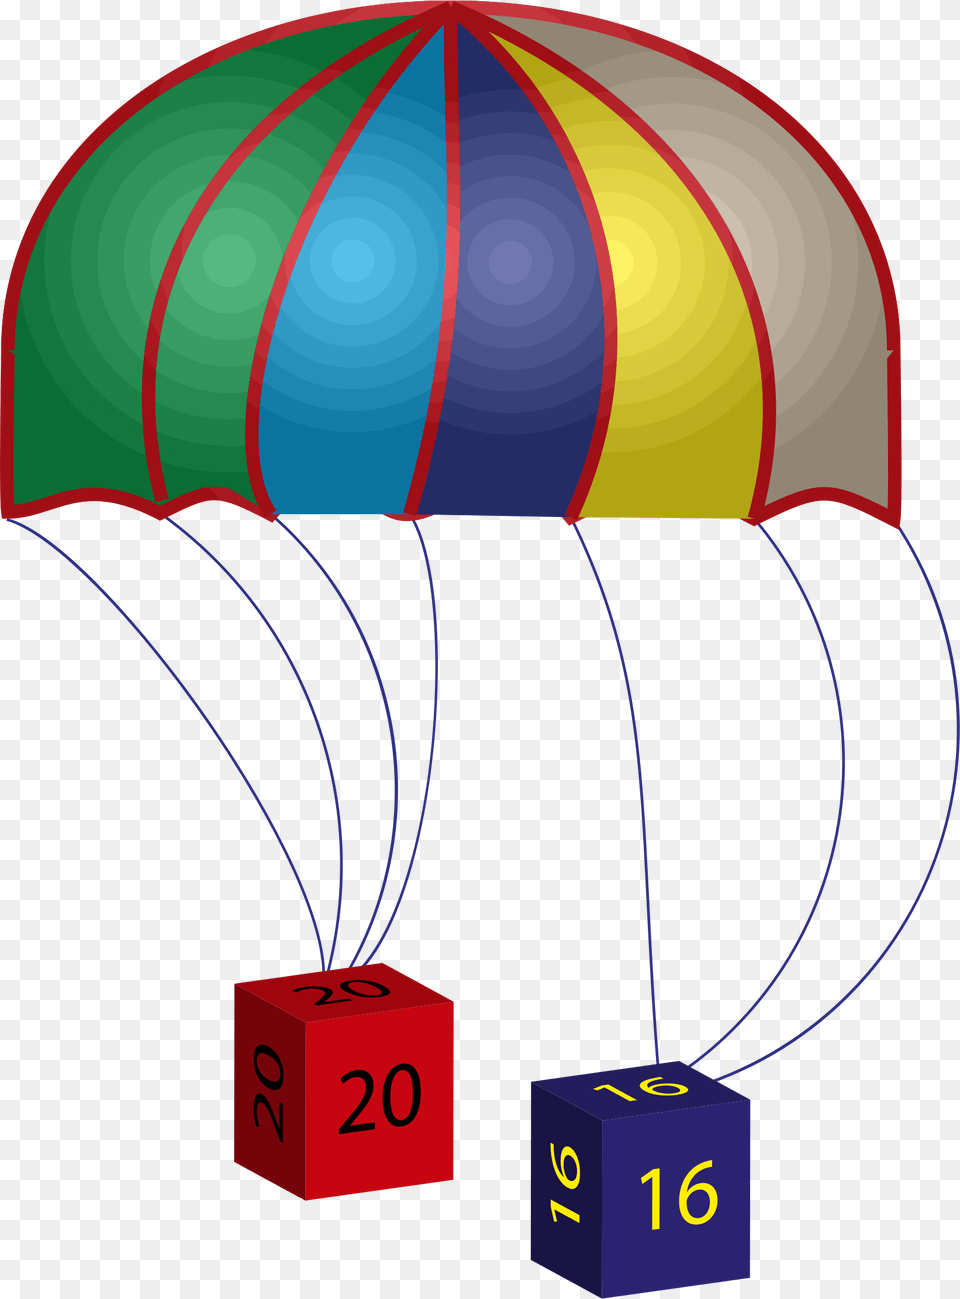 This Free Icons Design Of 2016 Parachute Png